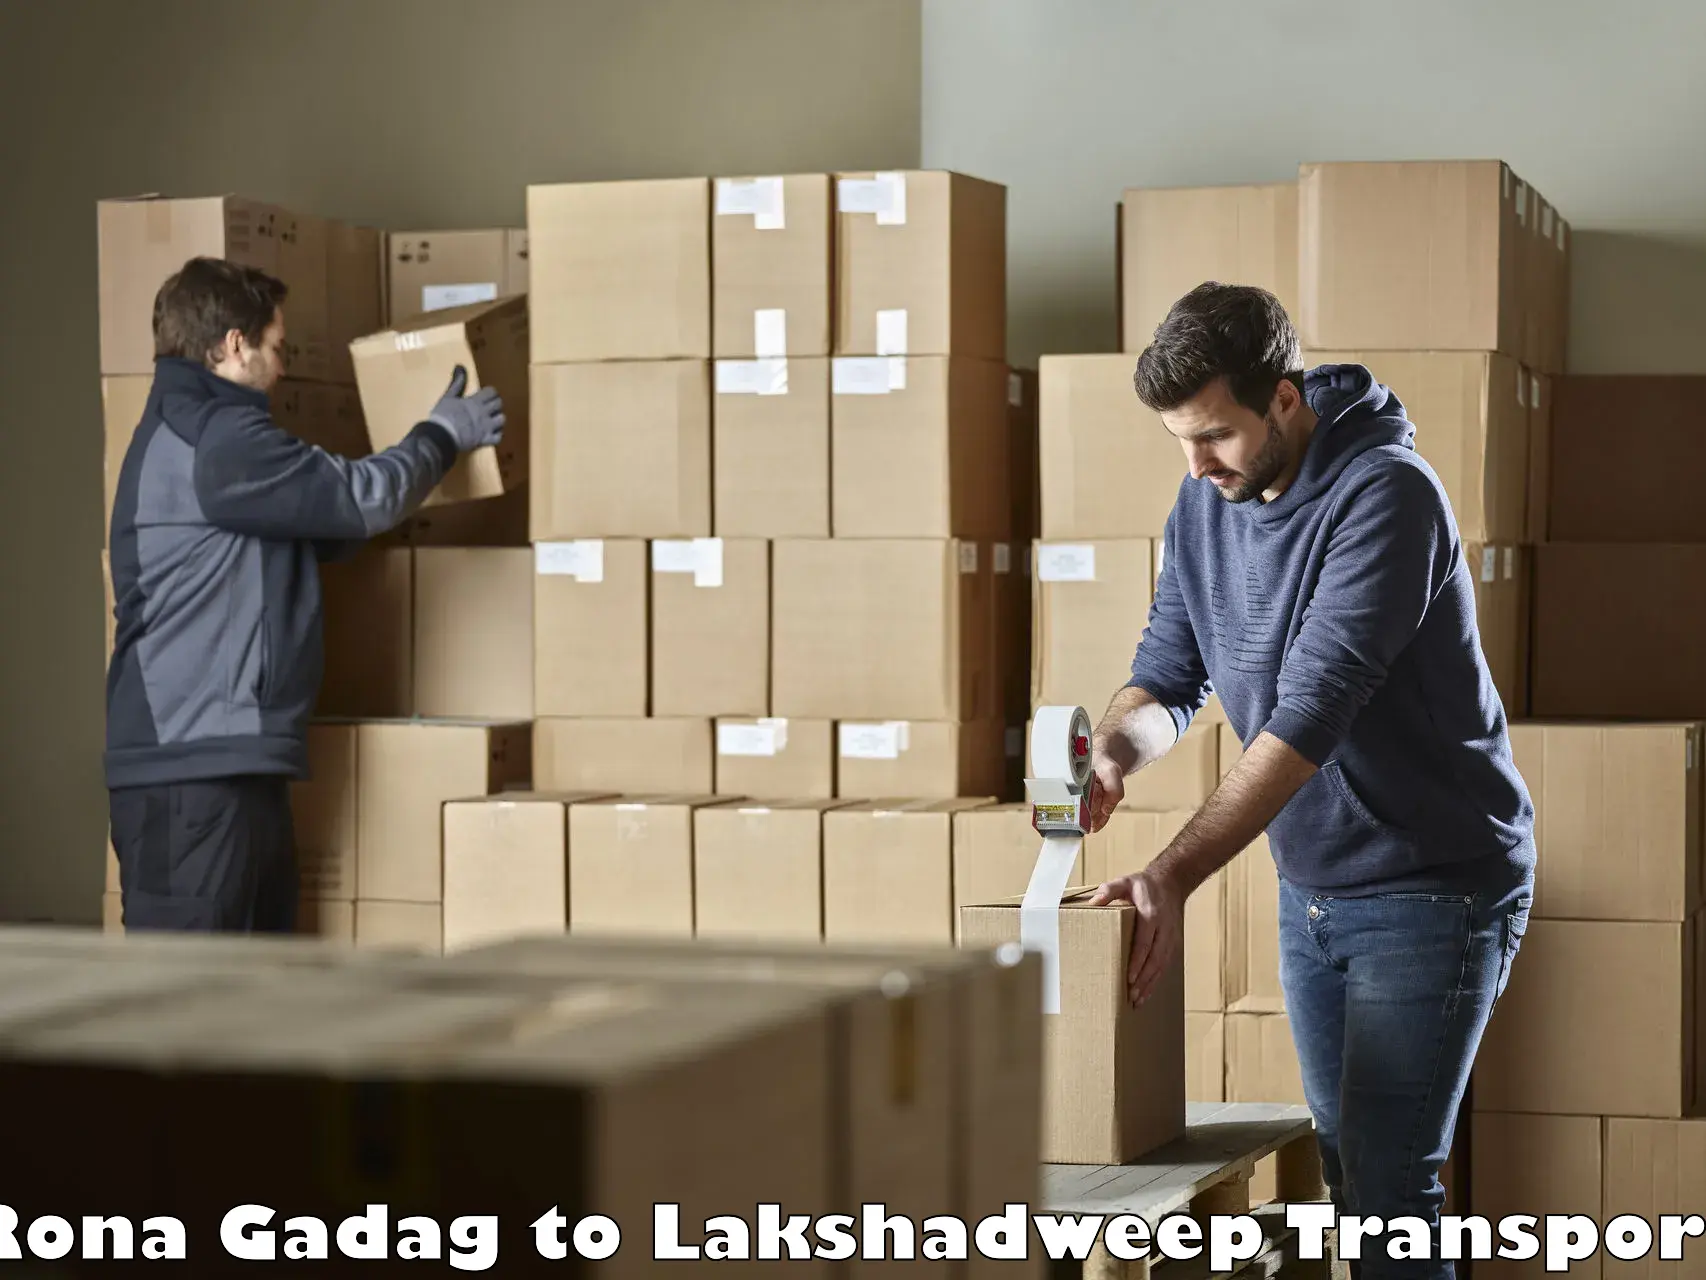 Cargo transport services in Rona Gadag to Lakshadweep